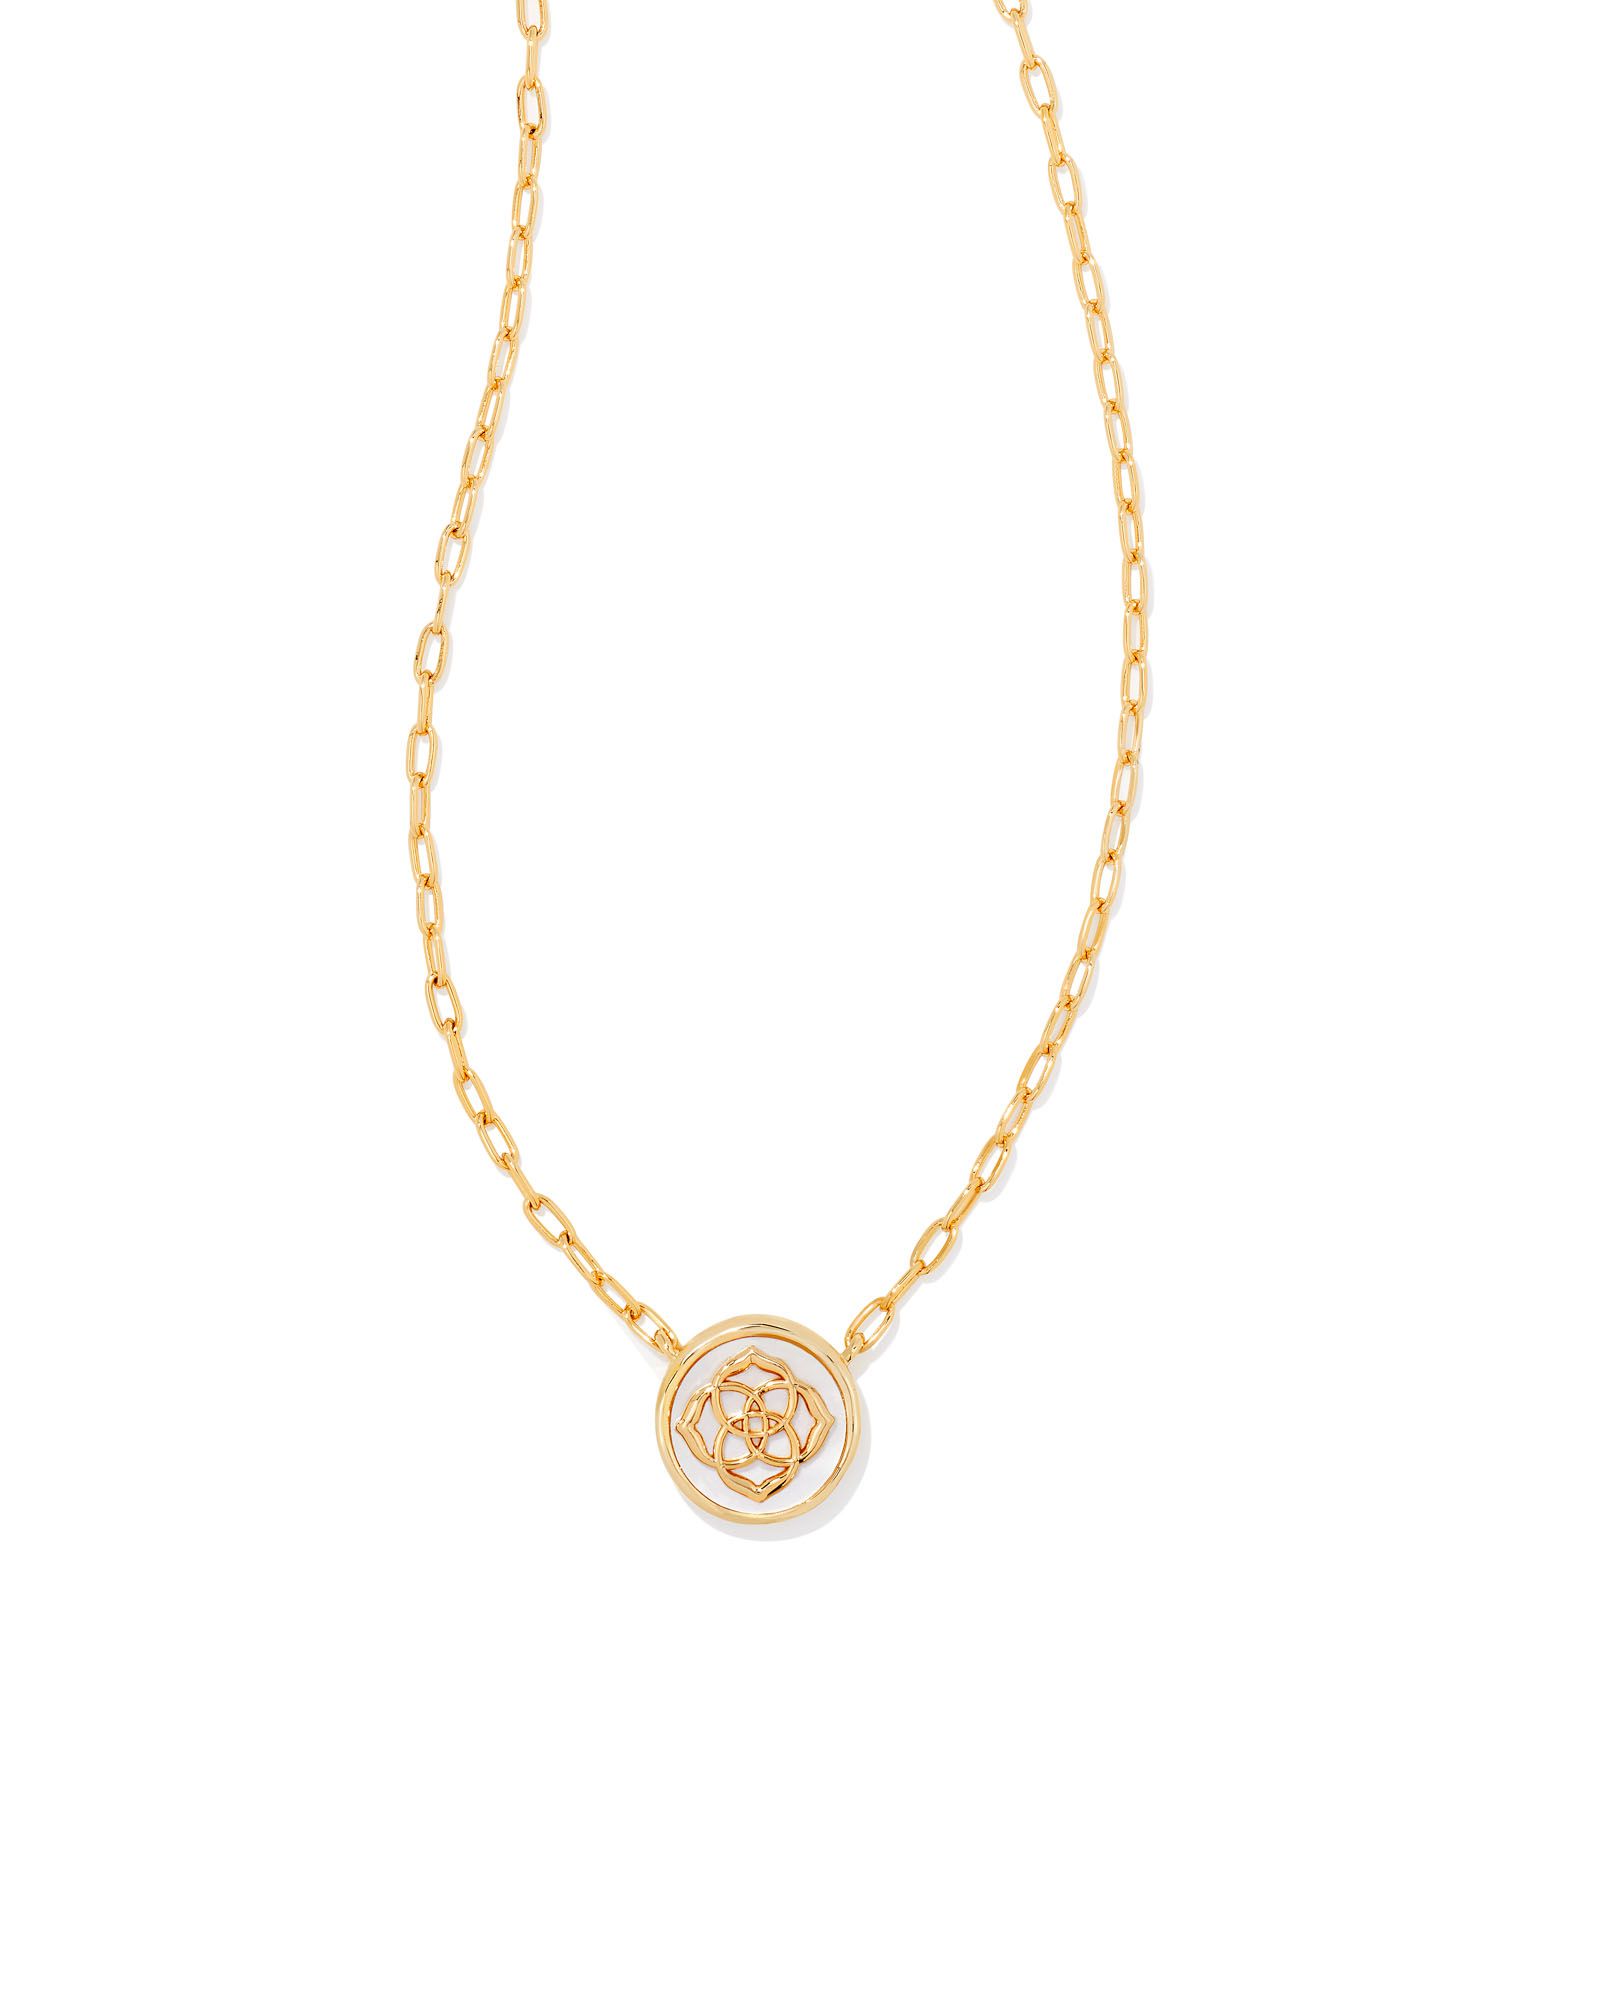 Stamped Dira Gold Pendant Necklace in Ivory Mother-Of-Pearl | Kendra Scott